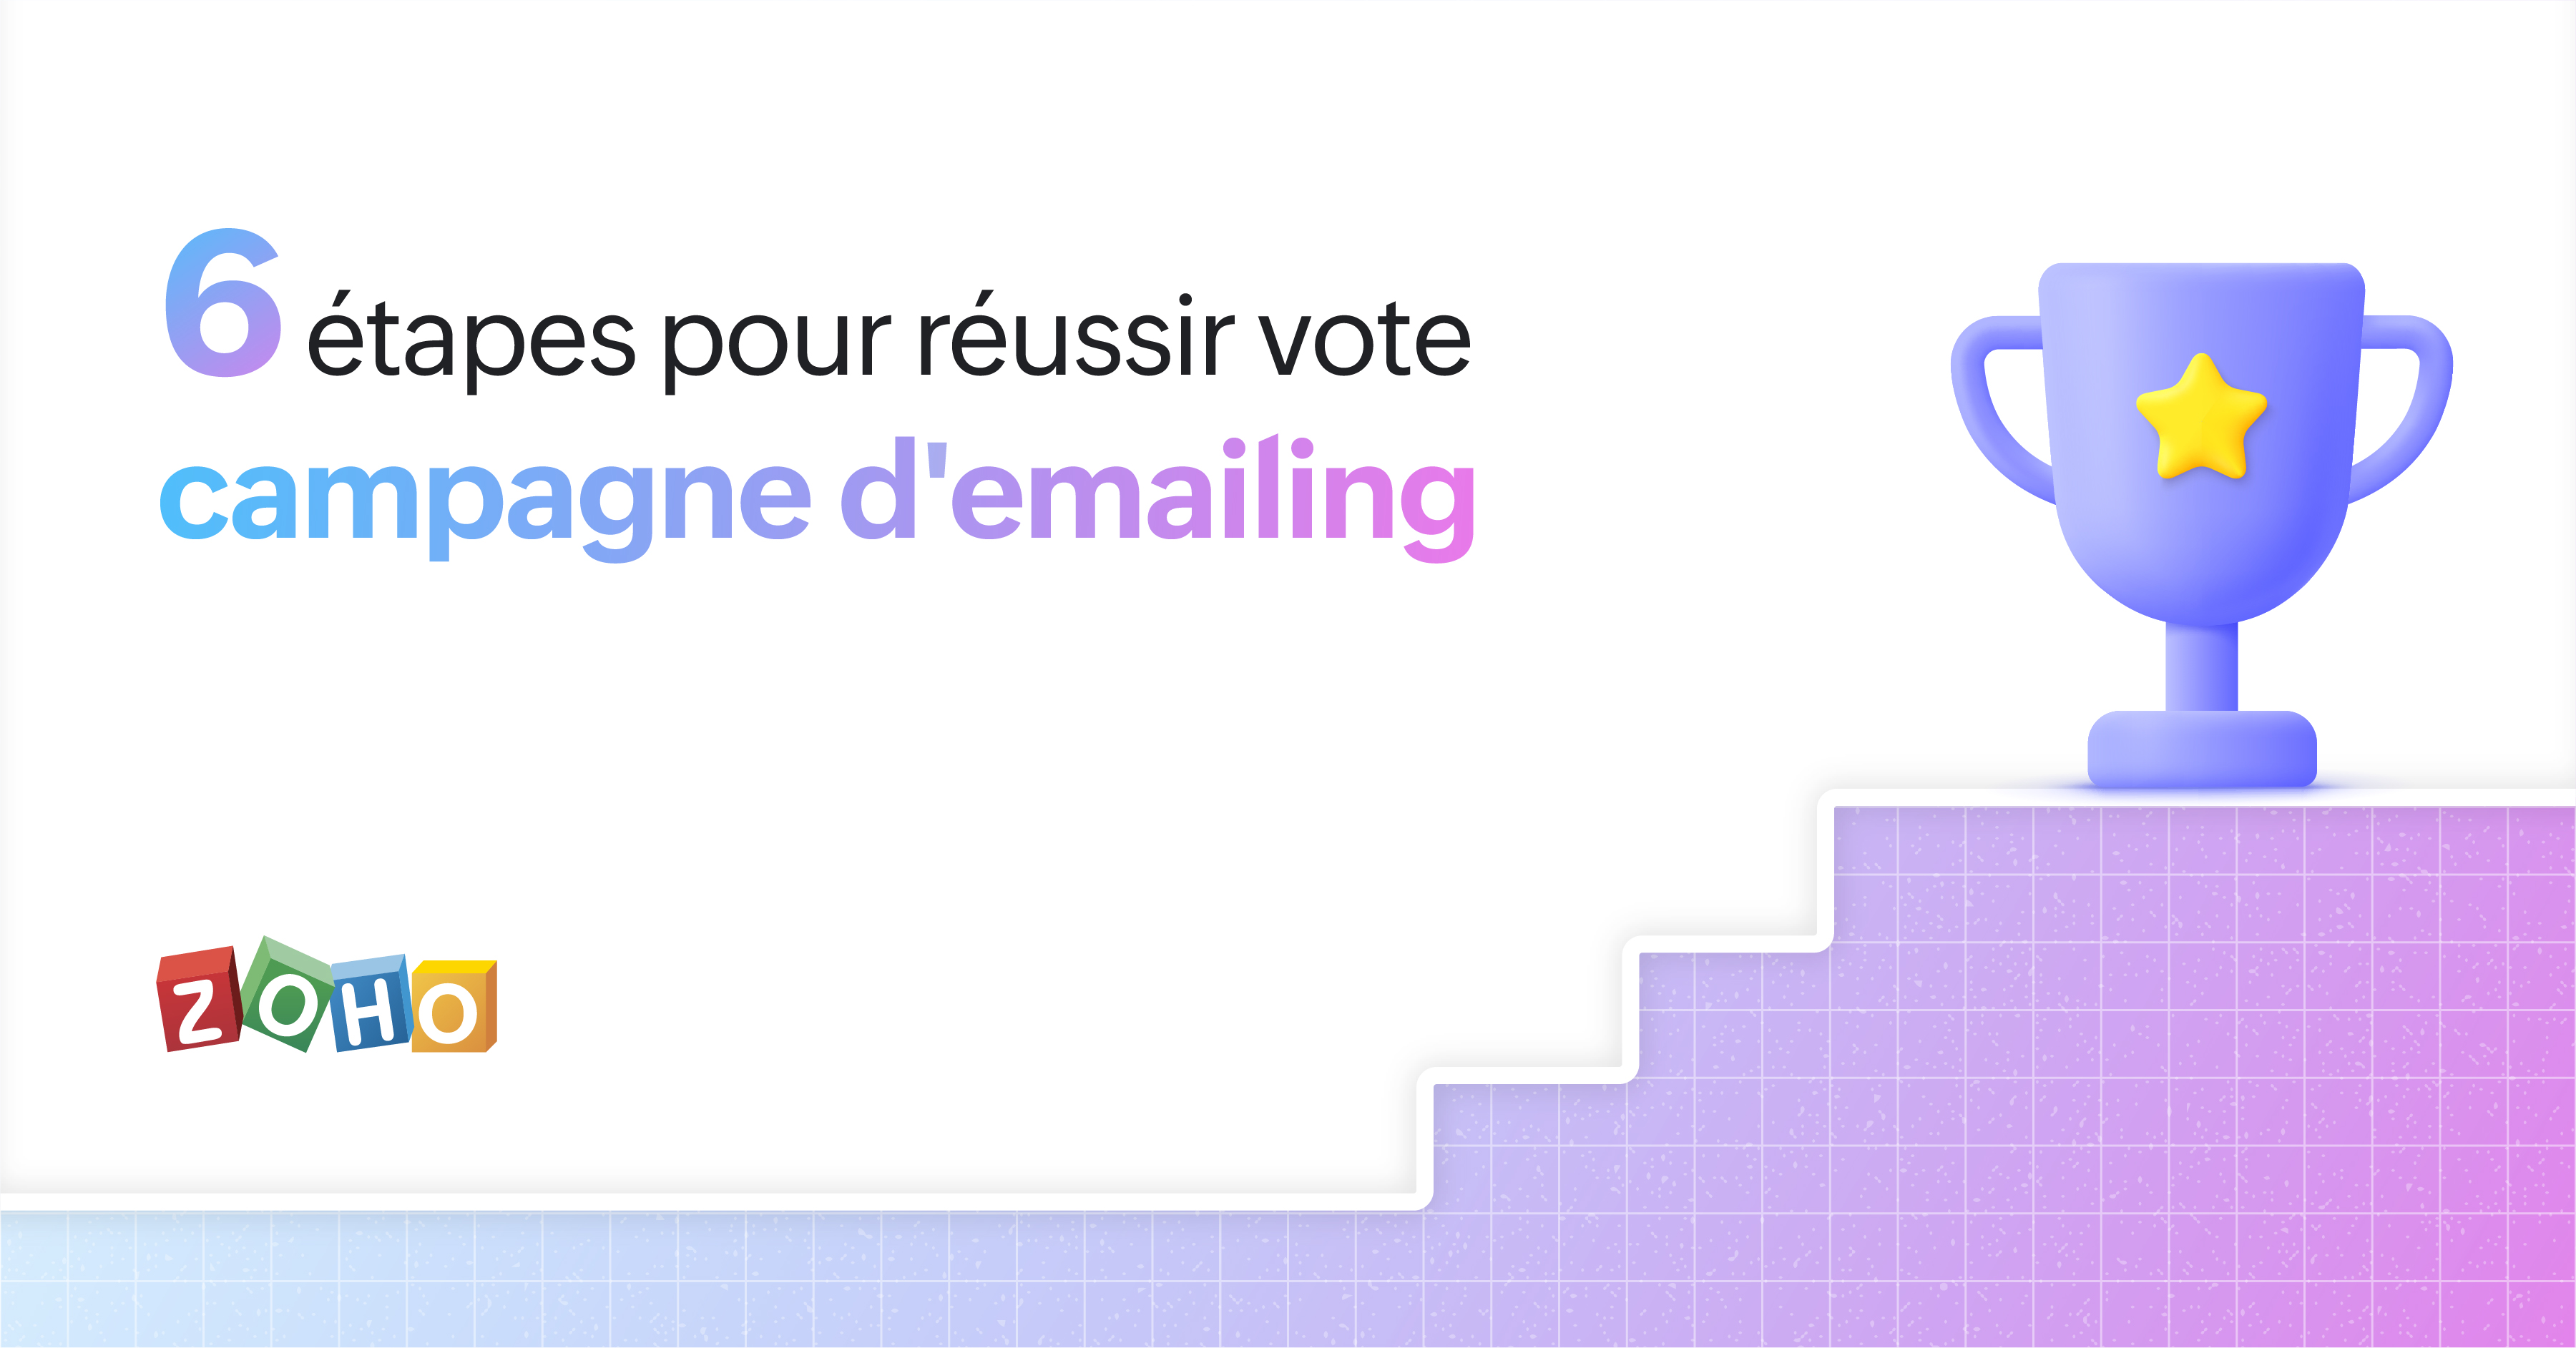 réussir campagne d'emailing